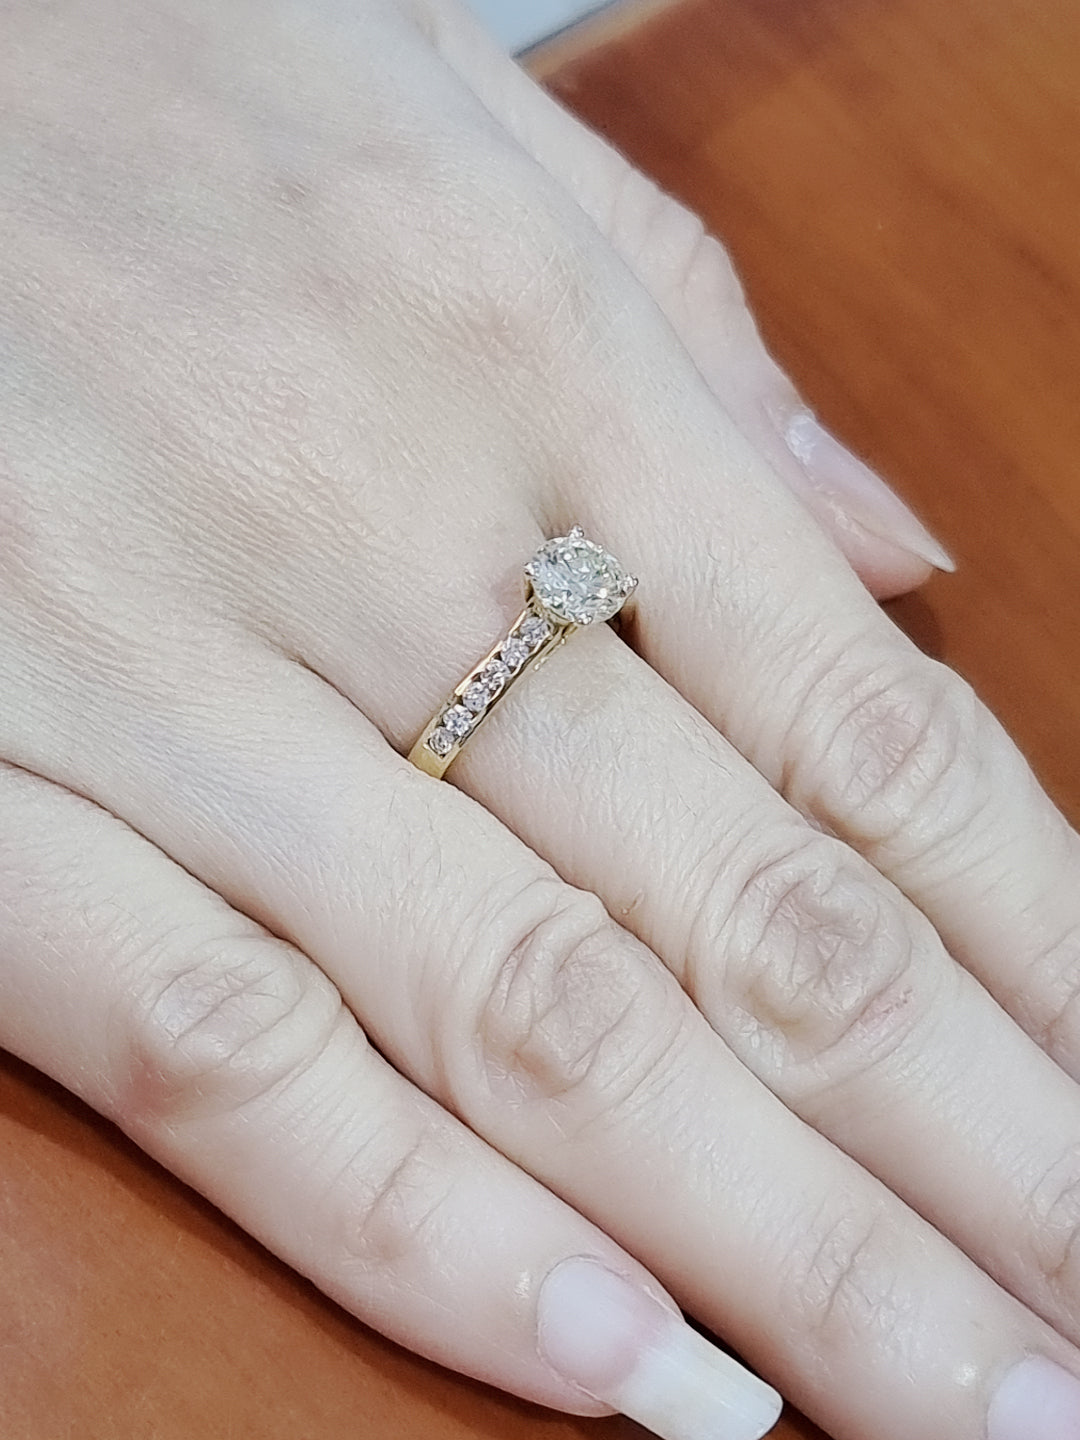 Solitaire Diamond Ring With Channel Set Accent Diamonds In 18k Yellow Gold.